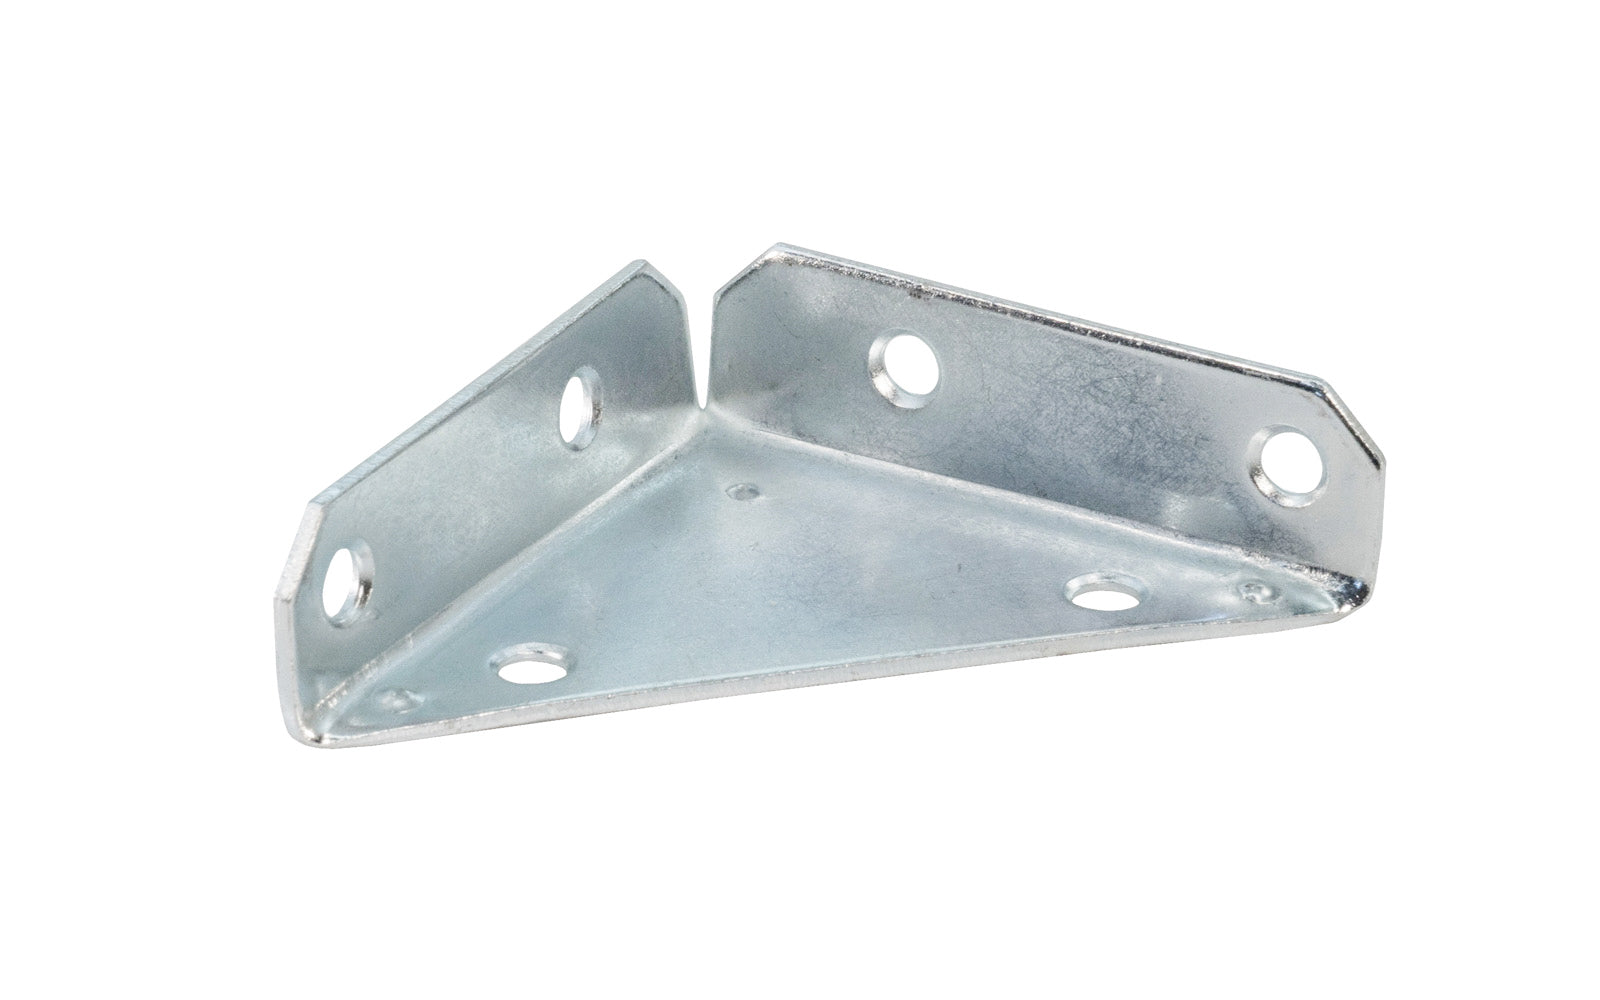 These corner braces with a backplate are designed for furniture, cabinets, shelving support.Allows for quick & easy repair of items in the workshop, home, & other applications. Made of steel material with a zinc plated finish. Countersunk holes. Sold as singles. Available in 2